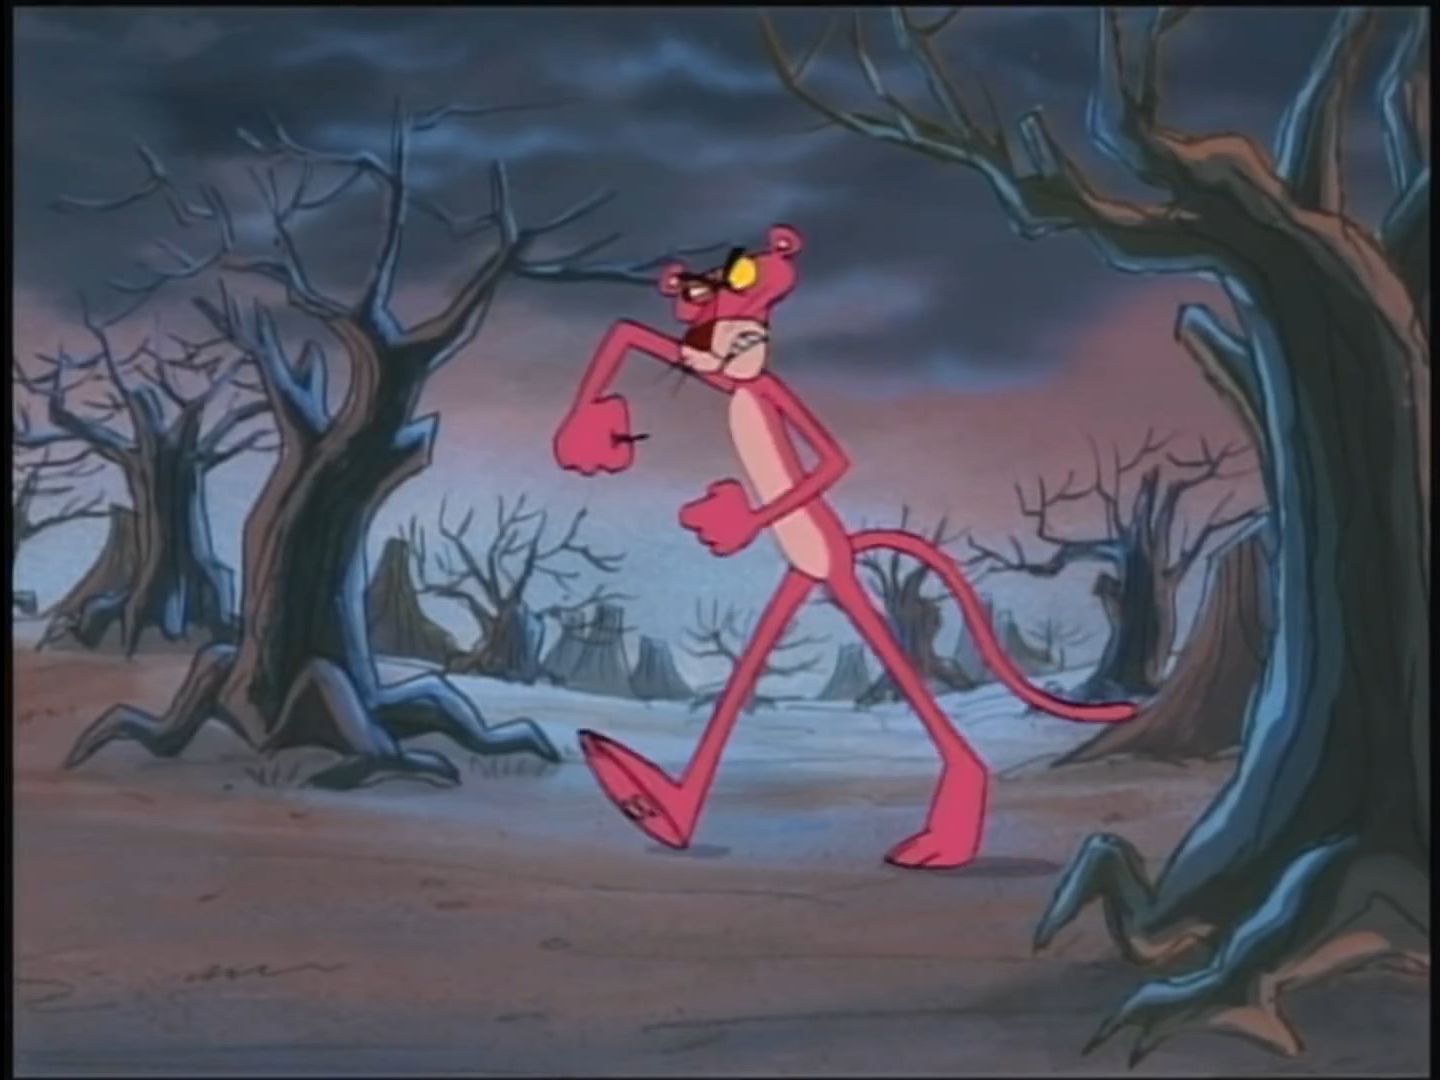 Pink Panther with Three Eyes Painting